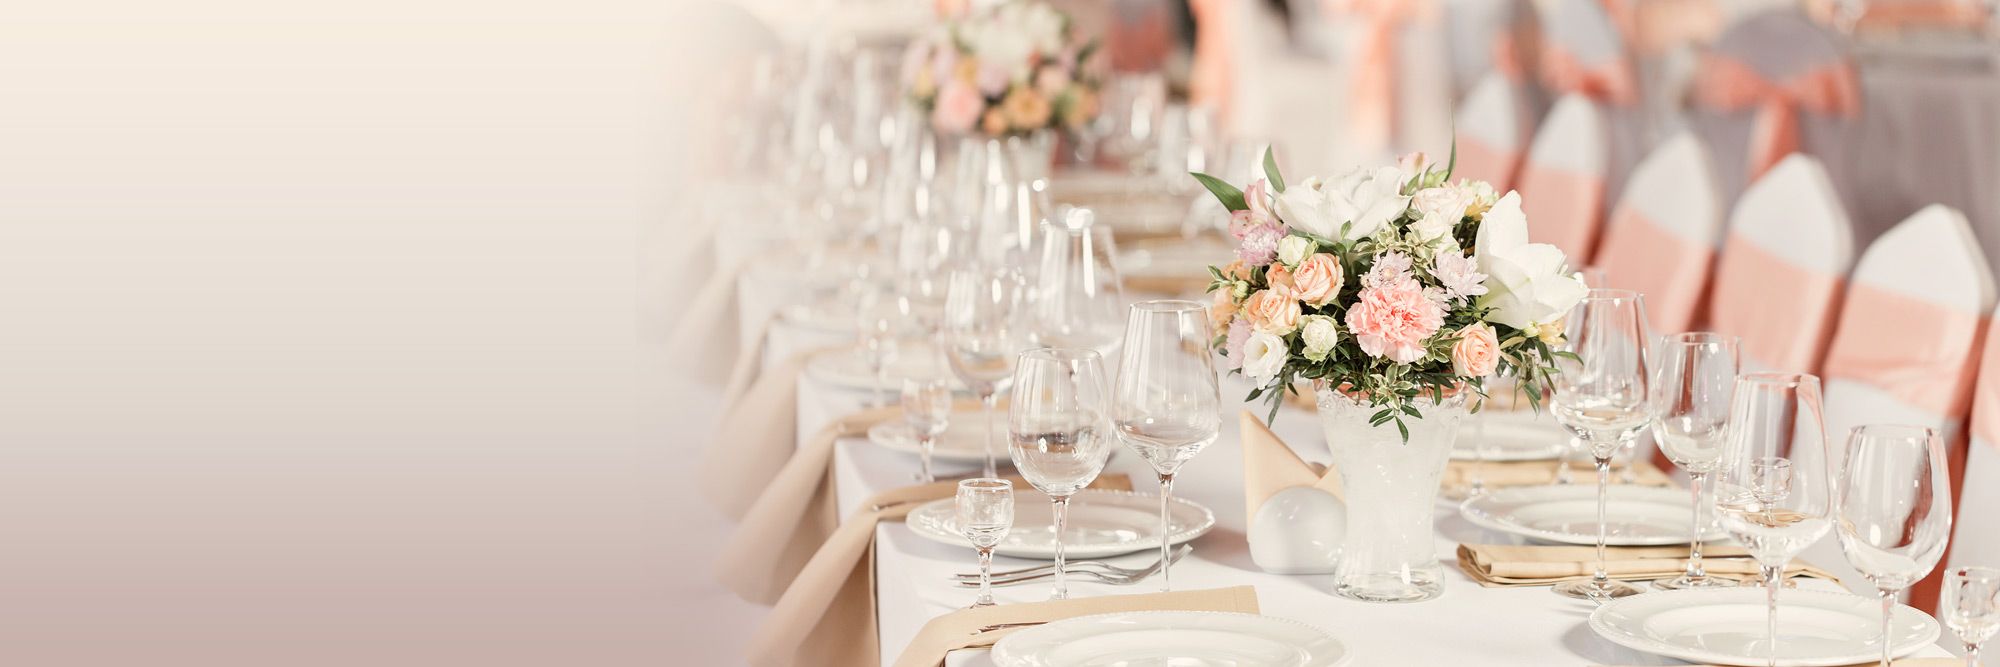 Wedding and Private Event Insurance